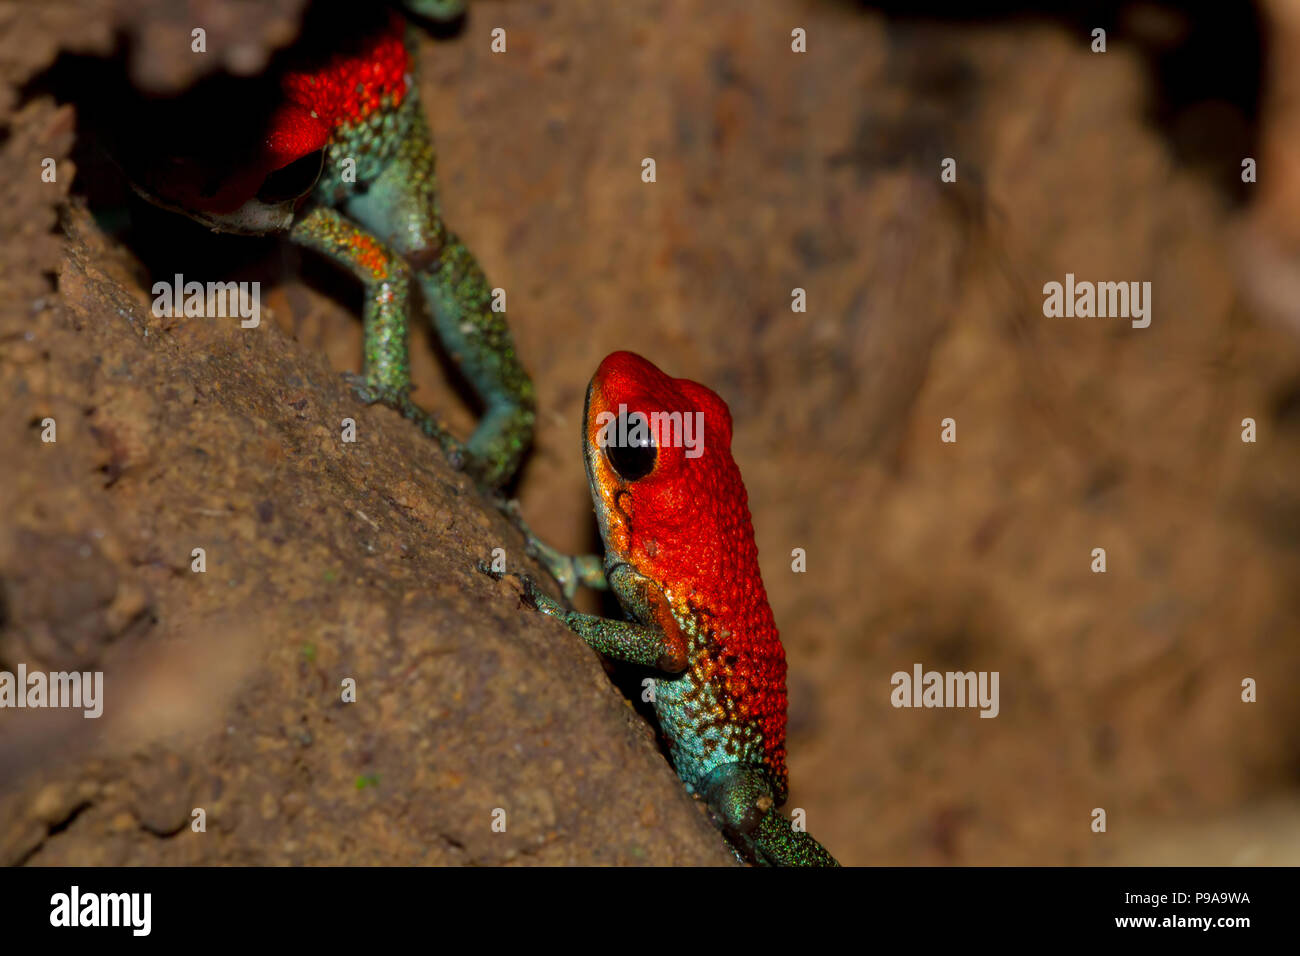 Pair of brightly colored granular poison arrow frogs in Costa Rica Stock Photo